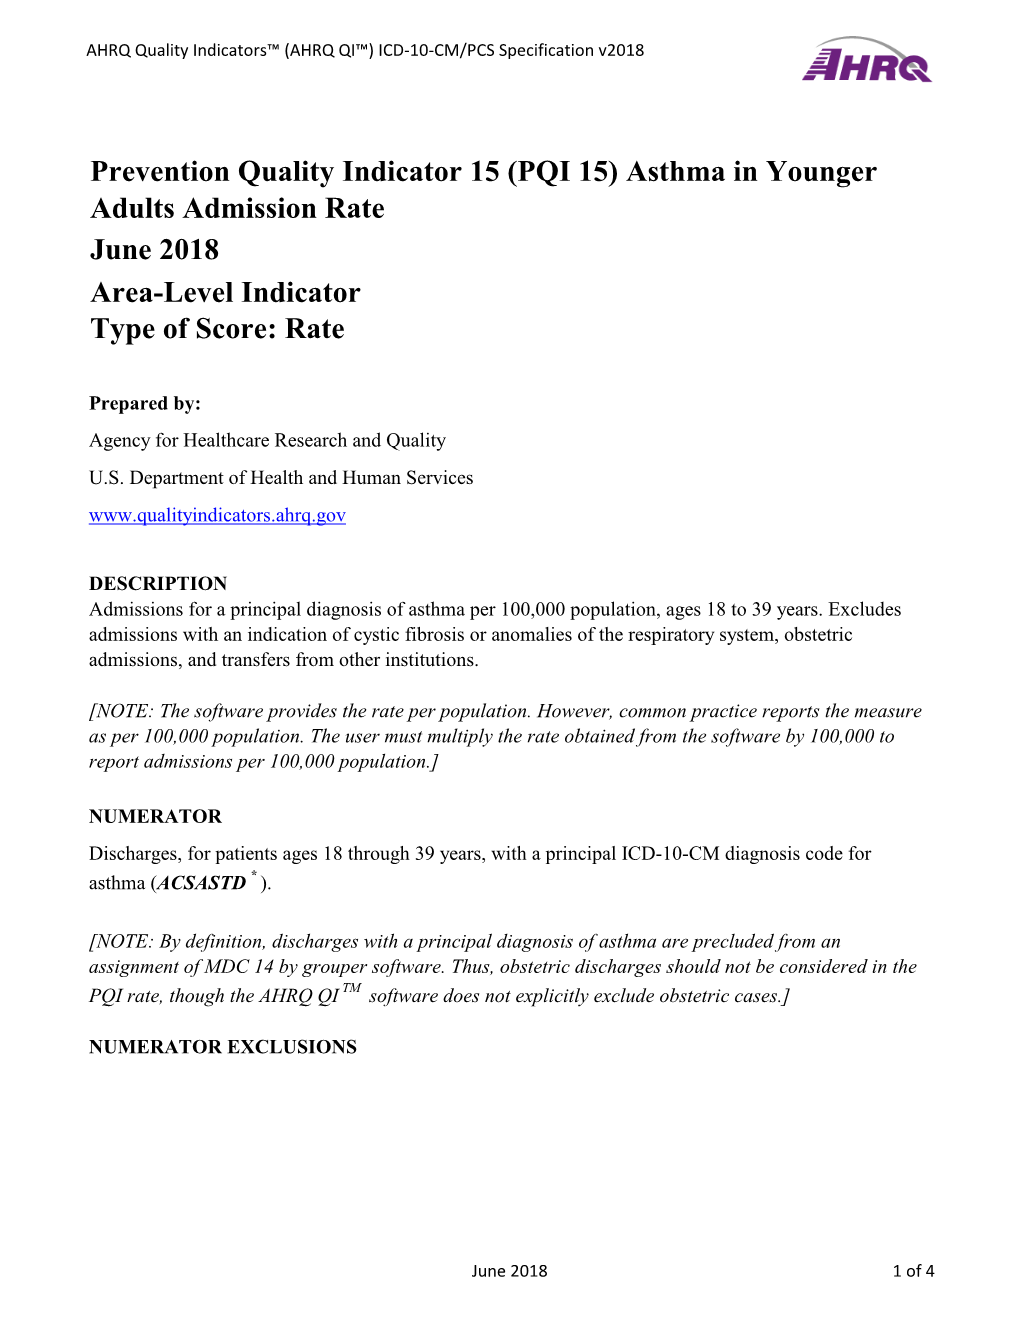 PQI 15) Asthma in Younger Adults Admission Rate June 2018 Area-Level Indicator Type of Score: Rate